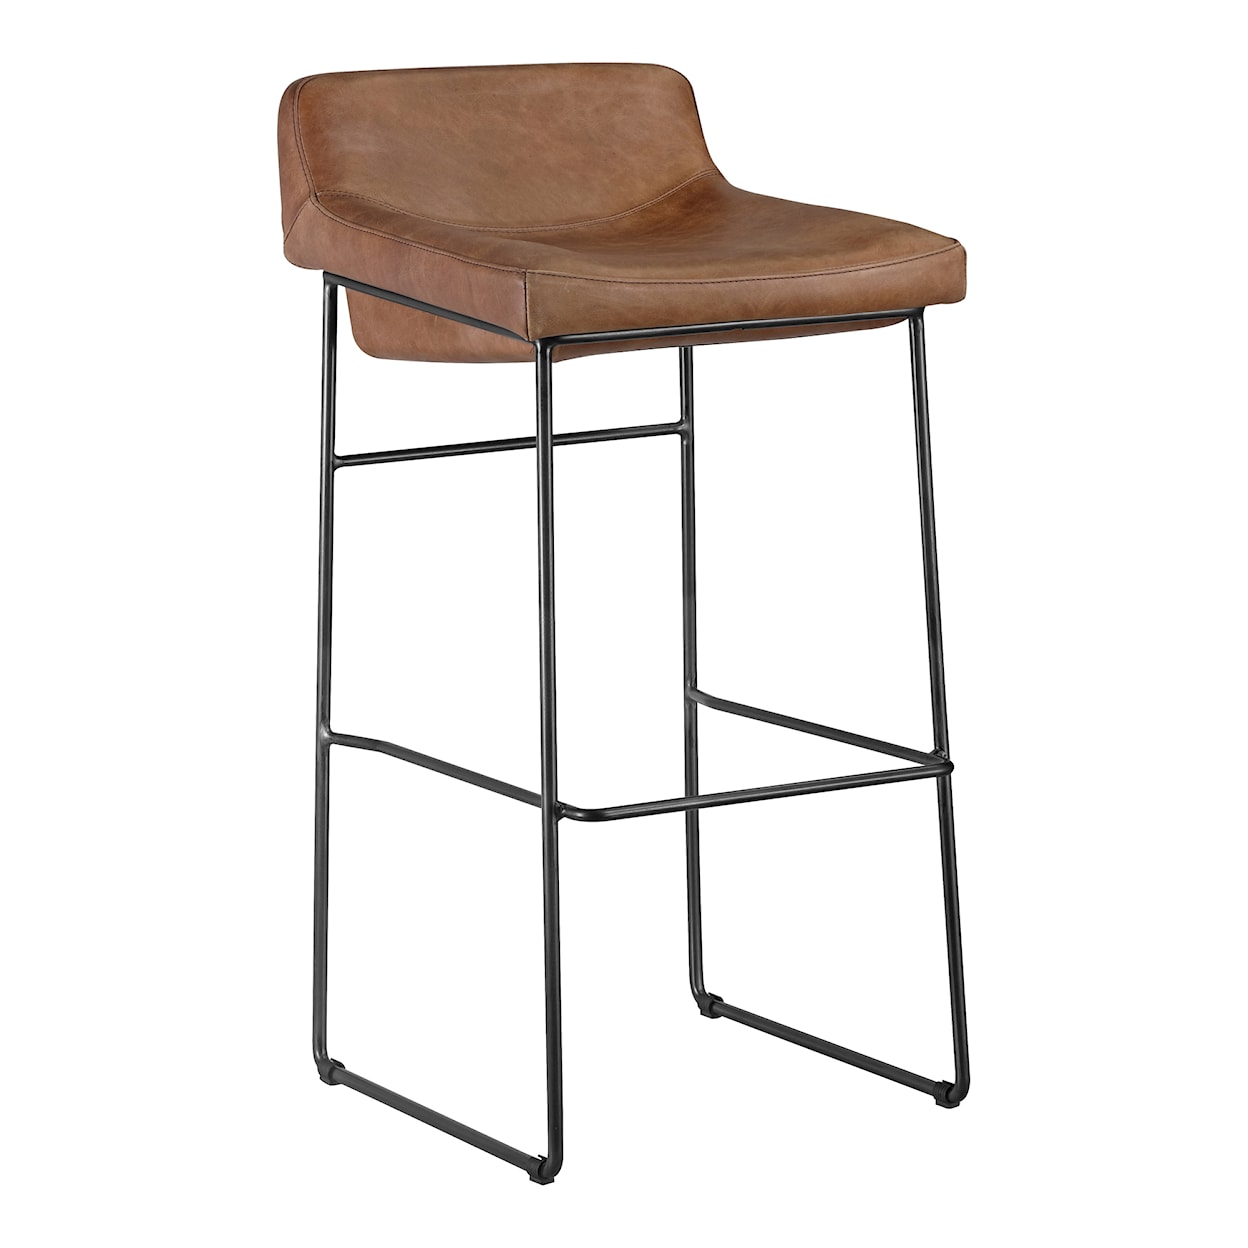 Moe's Home Collection Starlet Starlet Barstool Open Road Brown Leather-M2